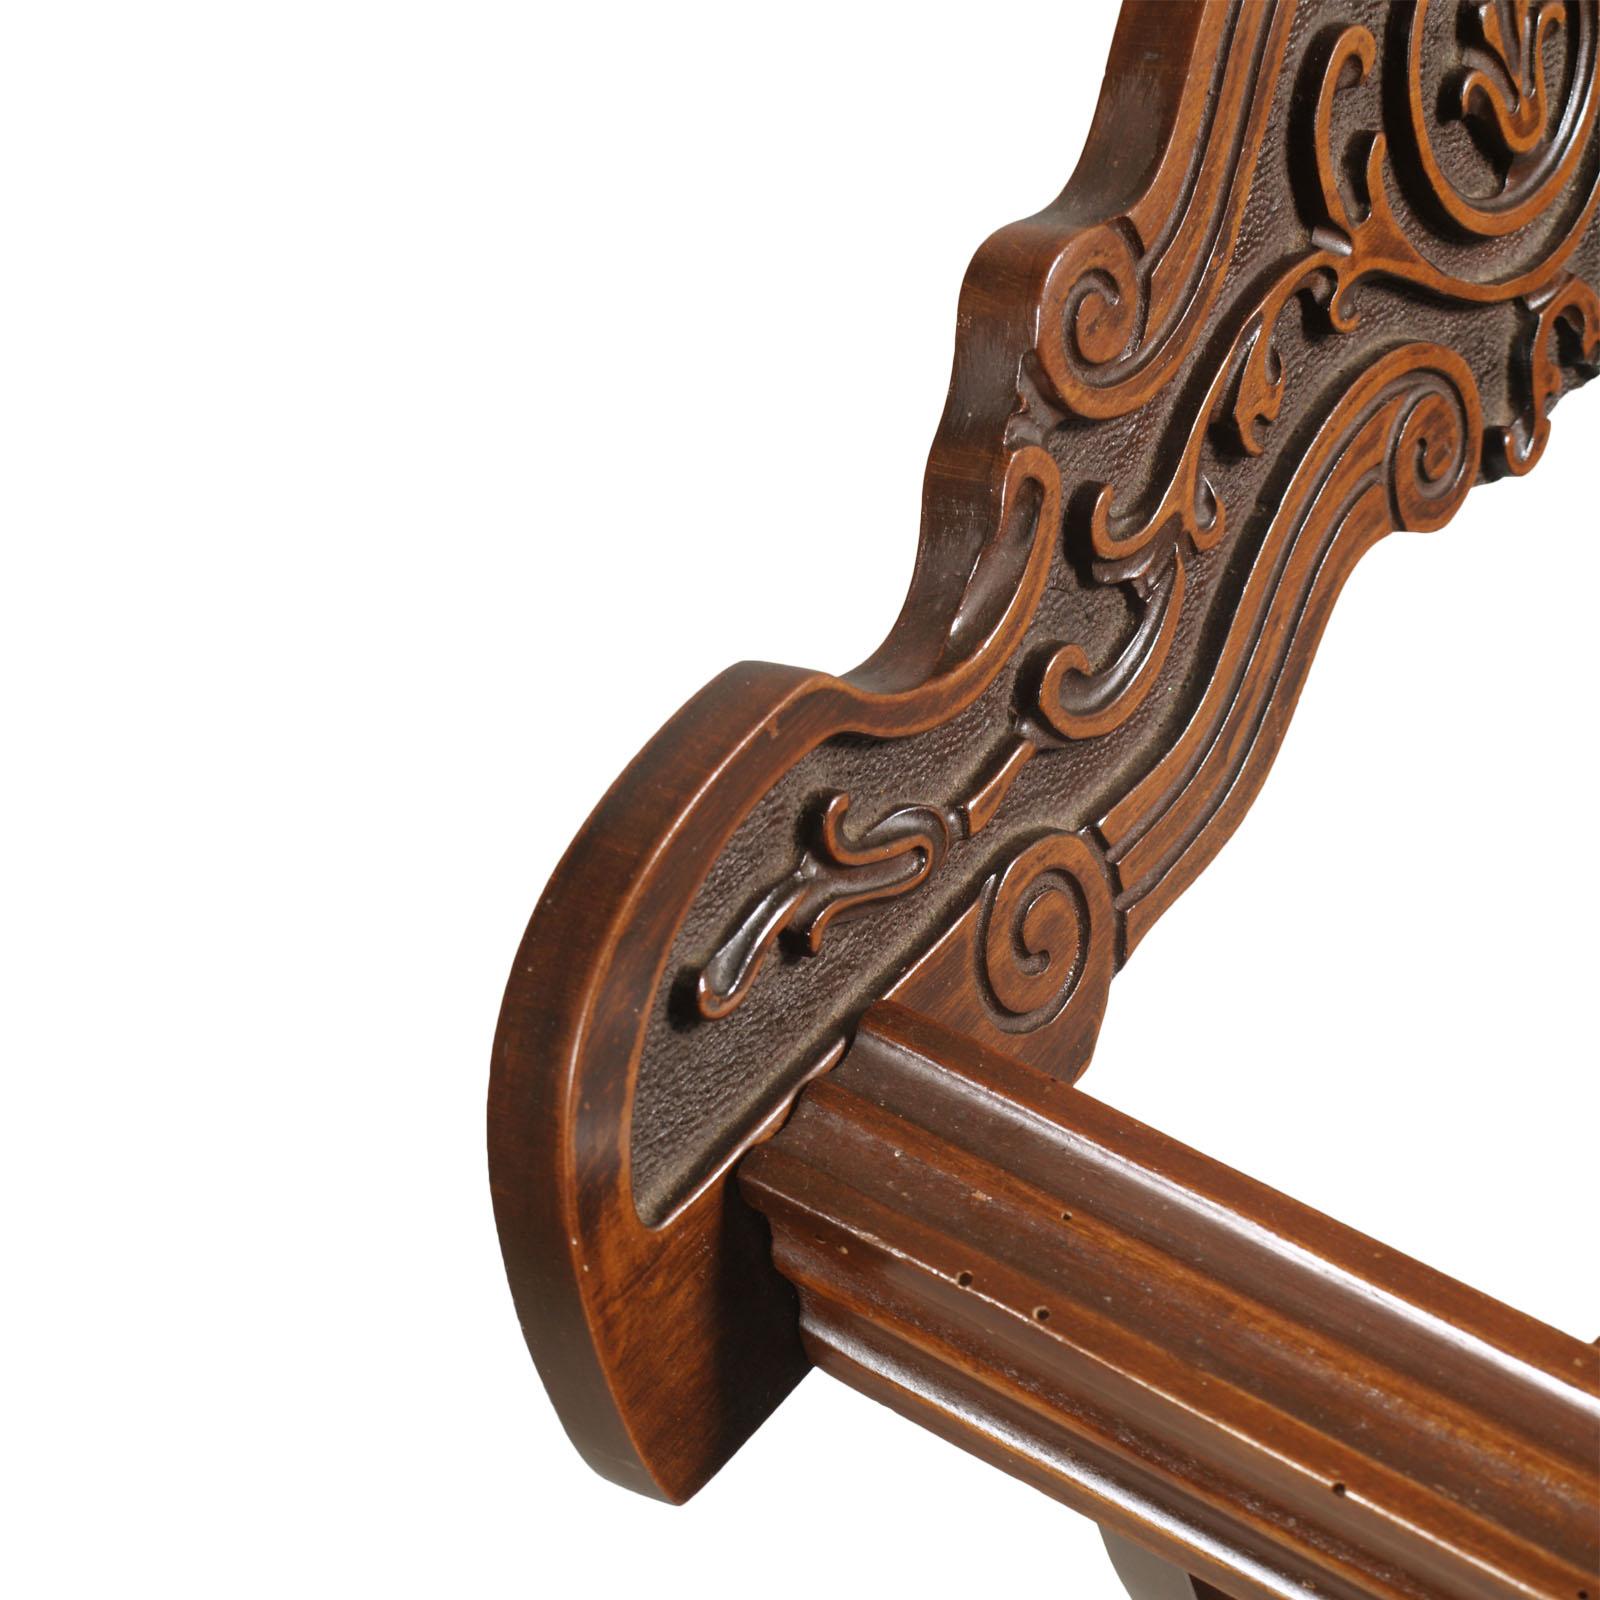 Renaissance Revival Savonarola Chair in Carved Walnut Restored and Wax Polished In Good Condition For Sale In Vigonza, Padua